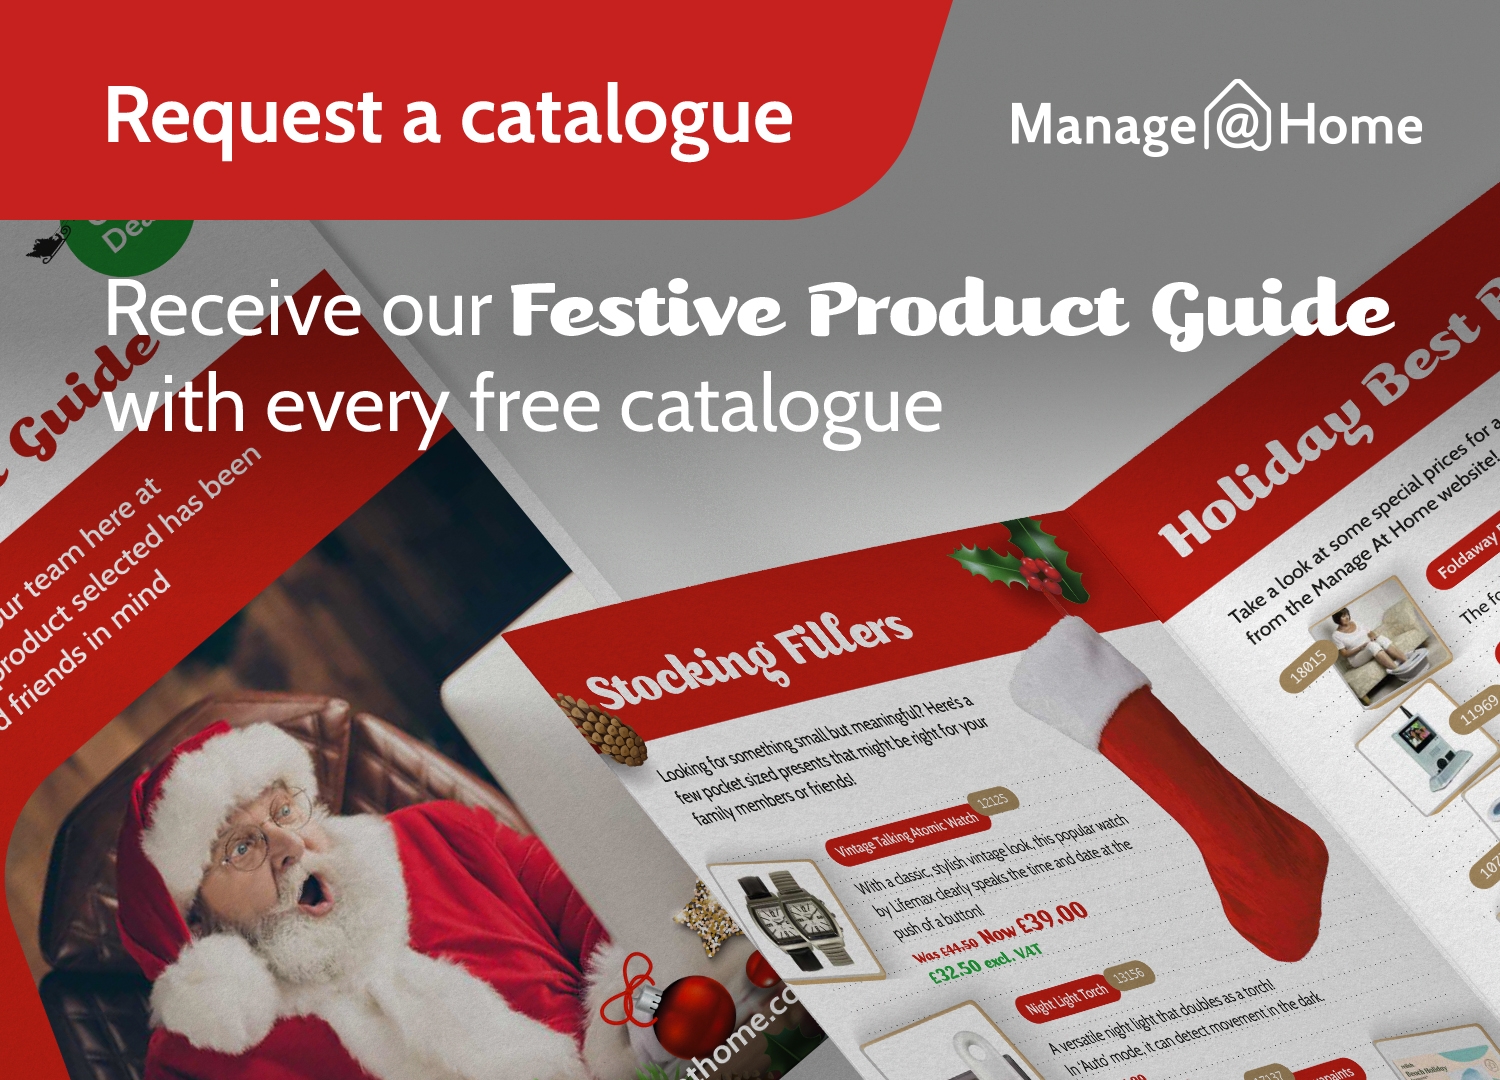 Request a catalogue - receive our free Festive Product Guide